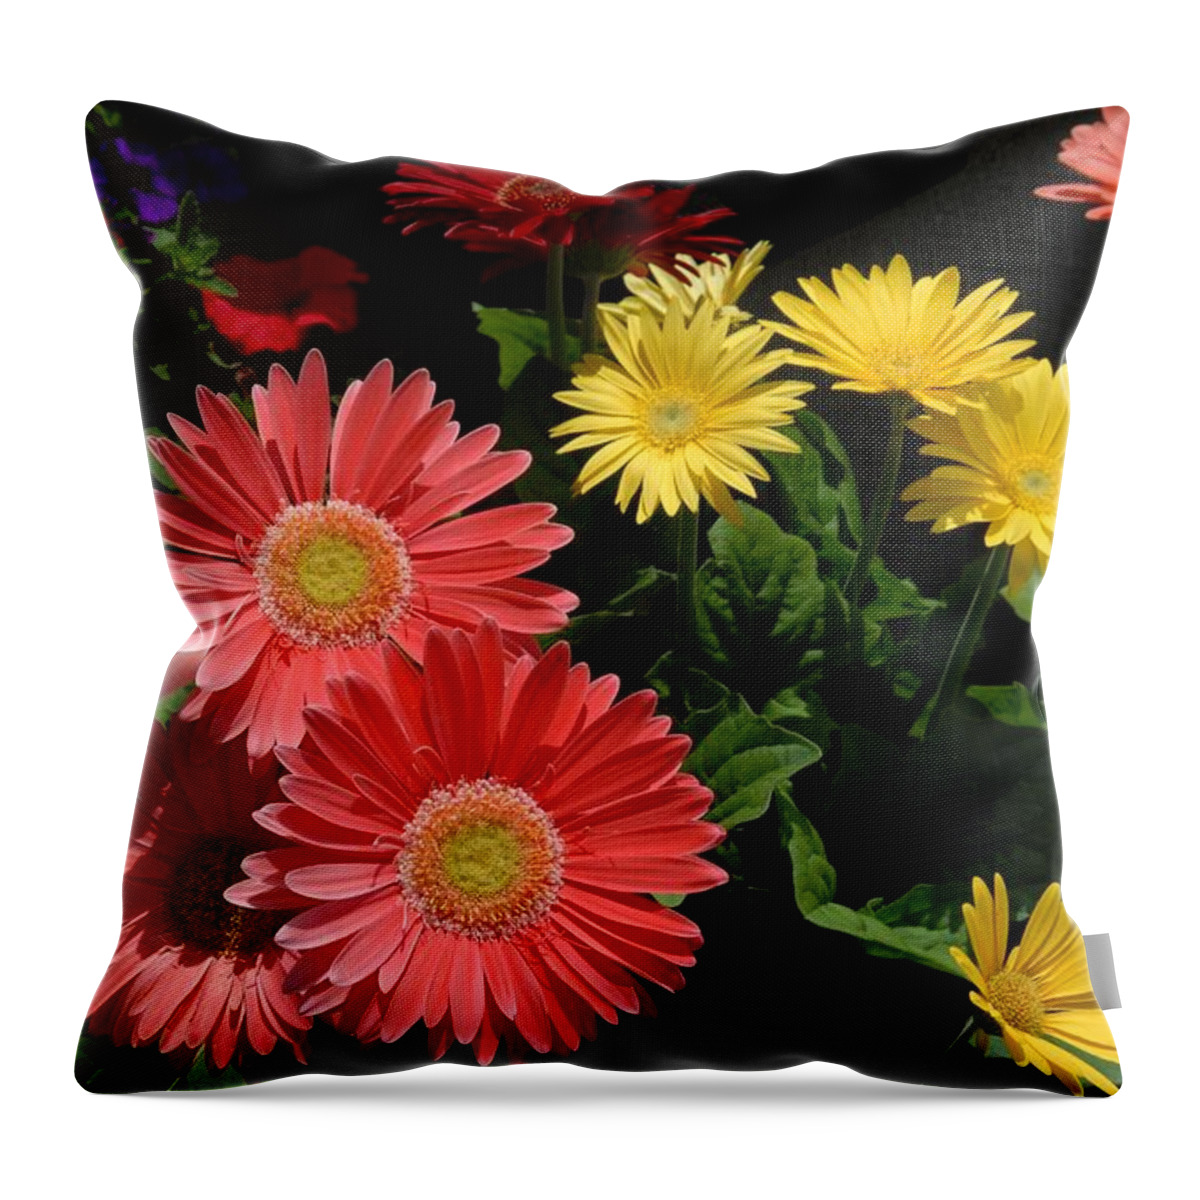 Splendid Pink Hibiscus With White Accents And Green Leaves Under July Sunlight At Freehold Throw Pillow featuring the photograph Flowers 728 by Joyce StJames